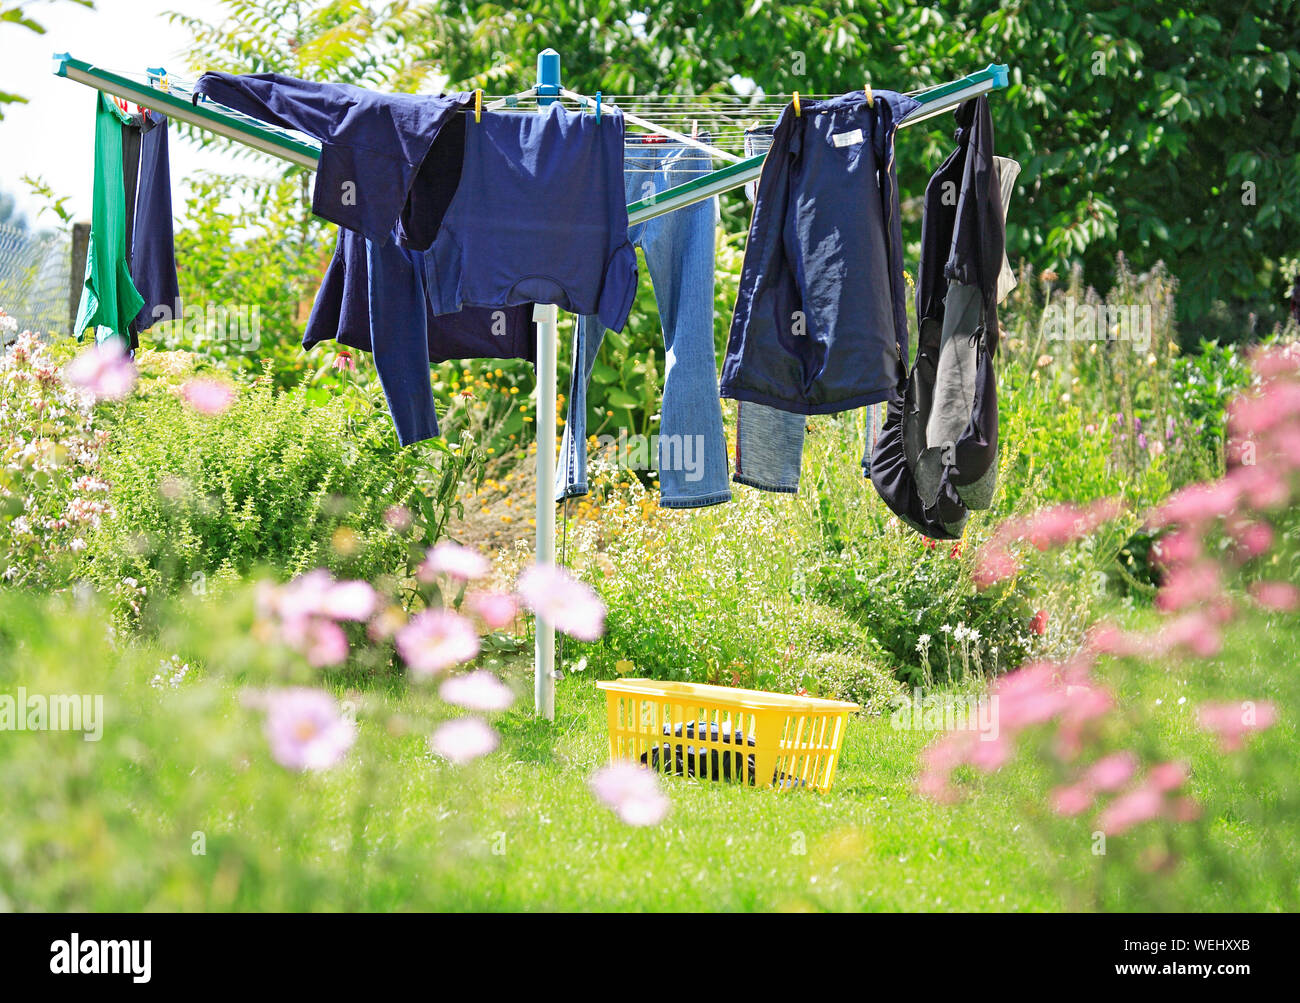 Clothes Drying On Rotary Washing Line On Grassy Field At Backyard Stock  Photo - Alamy